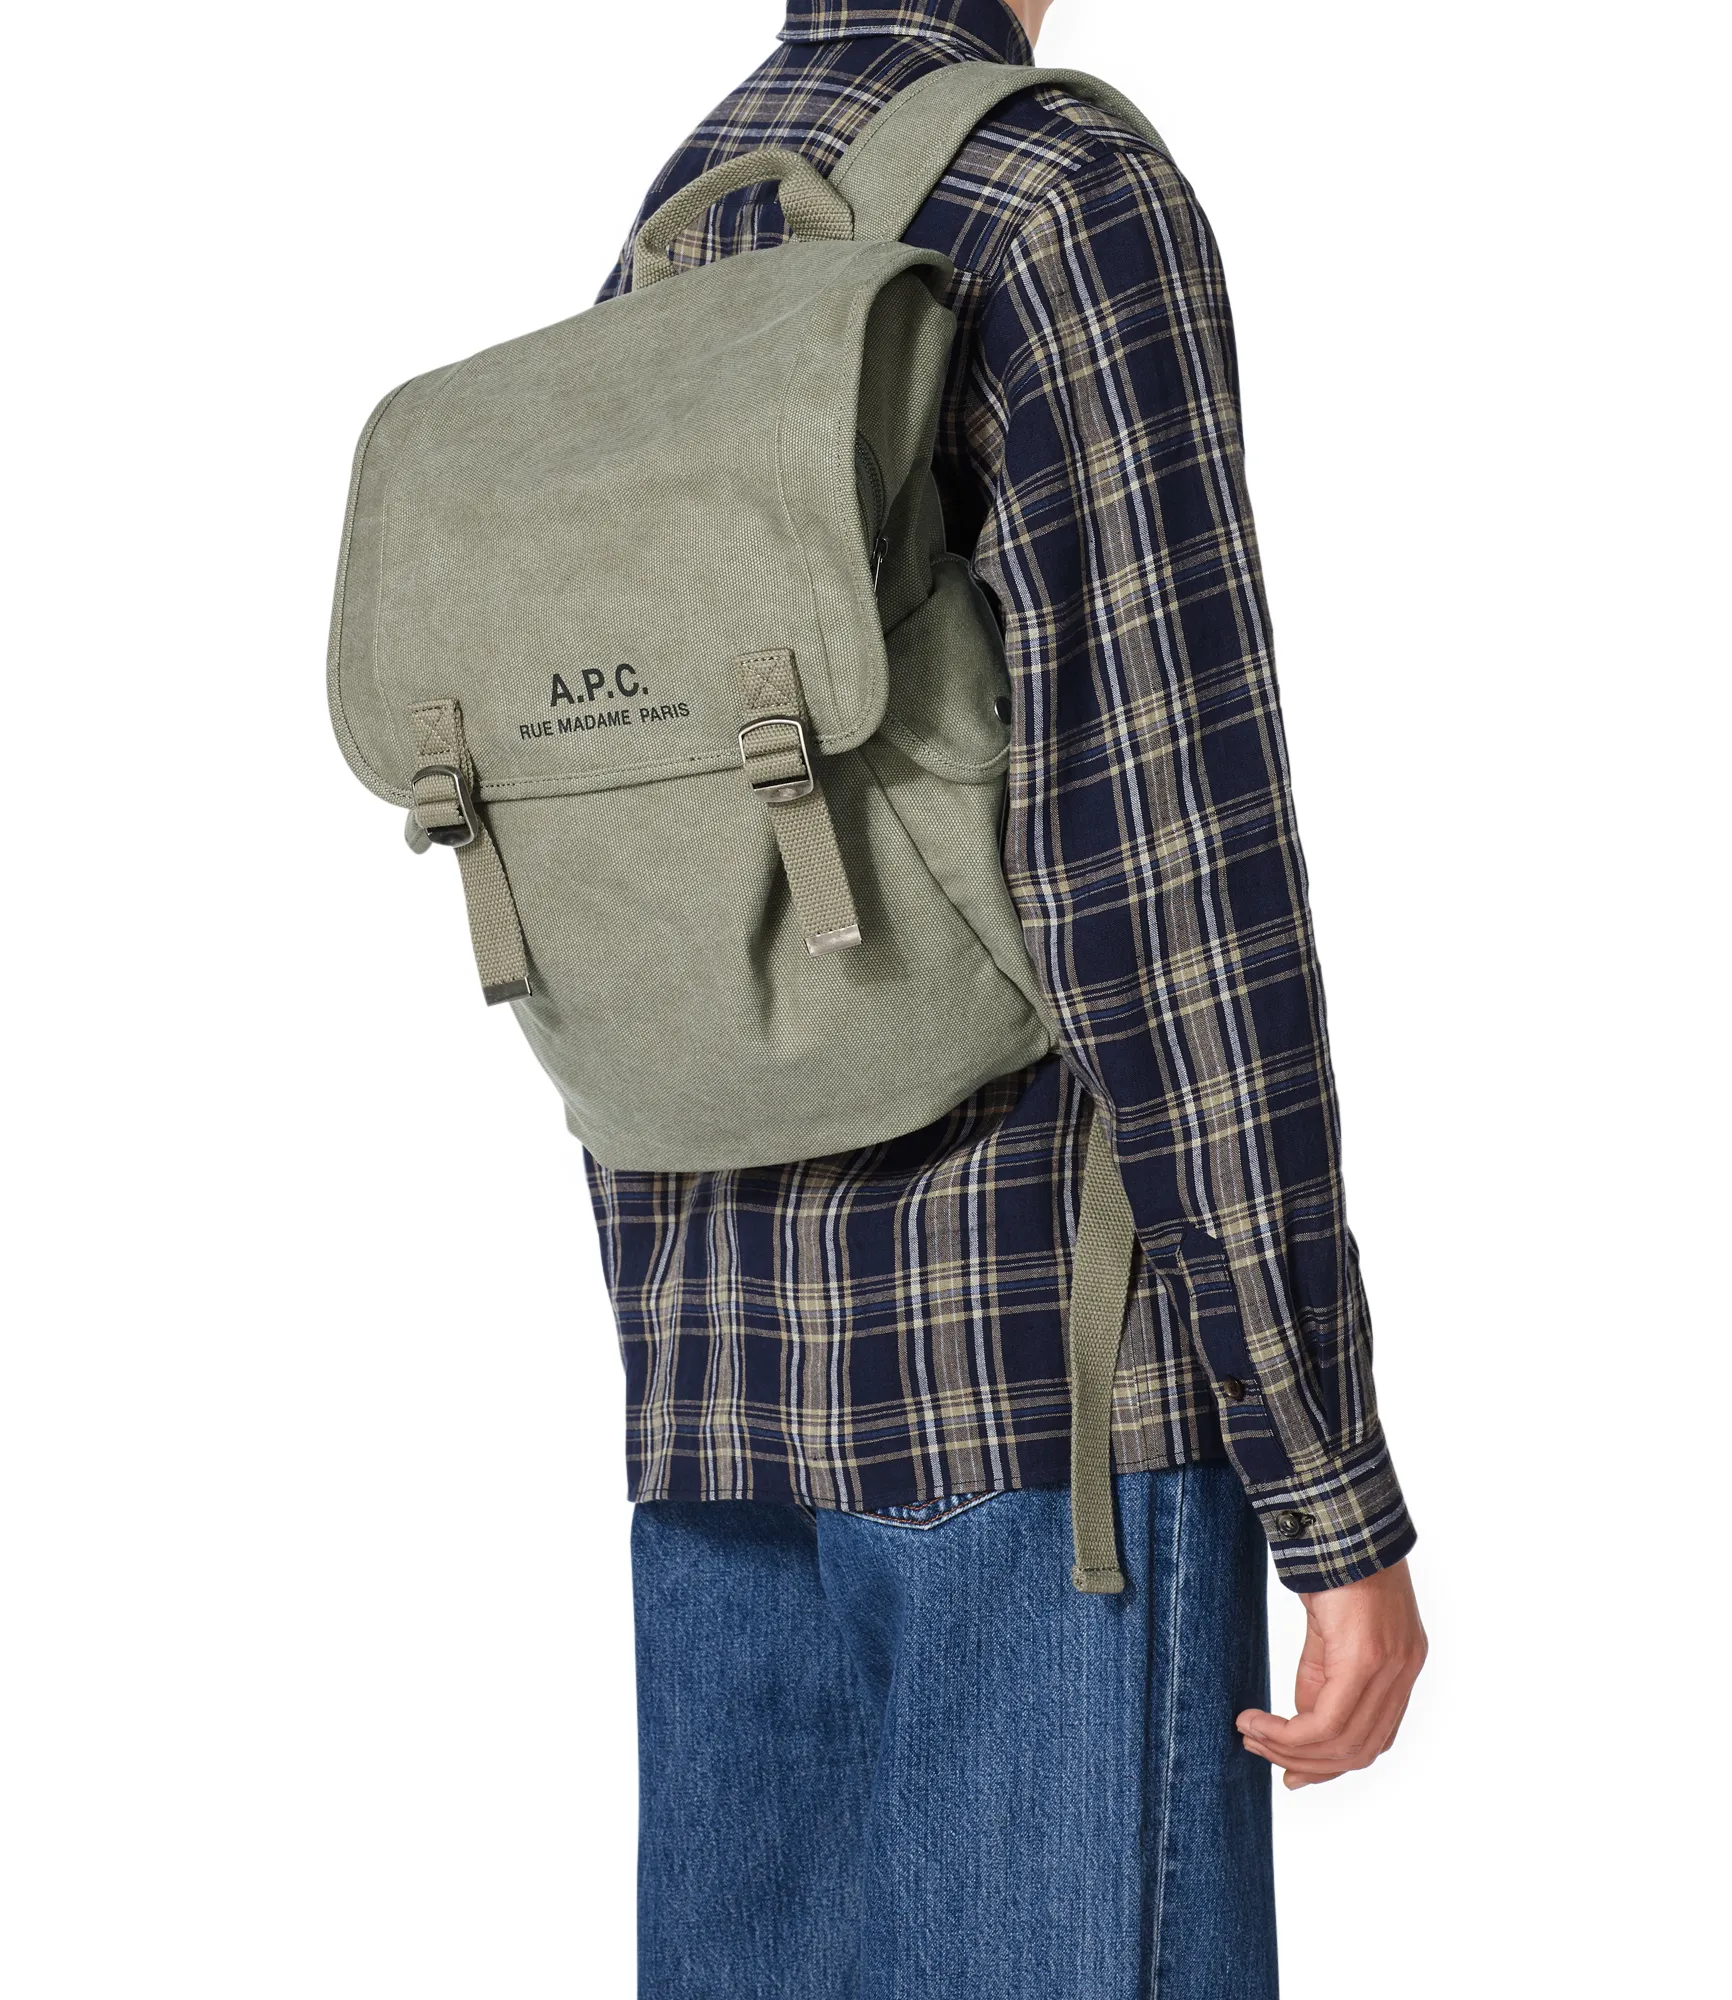 21FW 아페쎄 백팩, A.P.C. Recuperation backpack